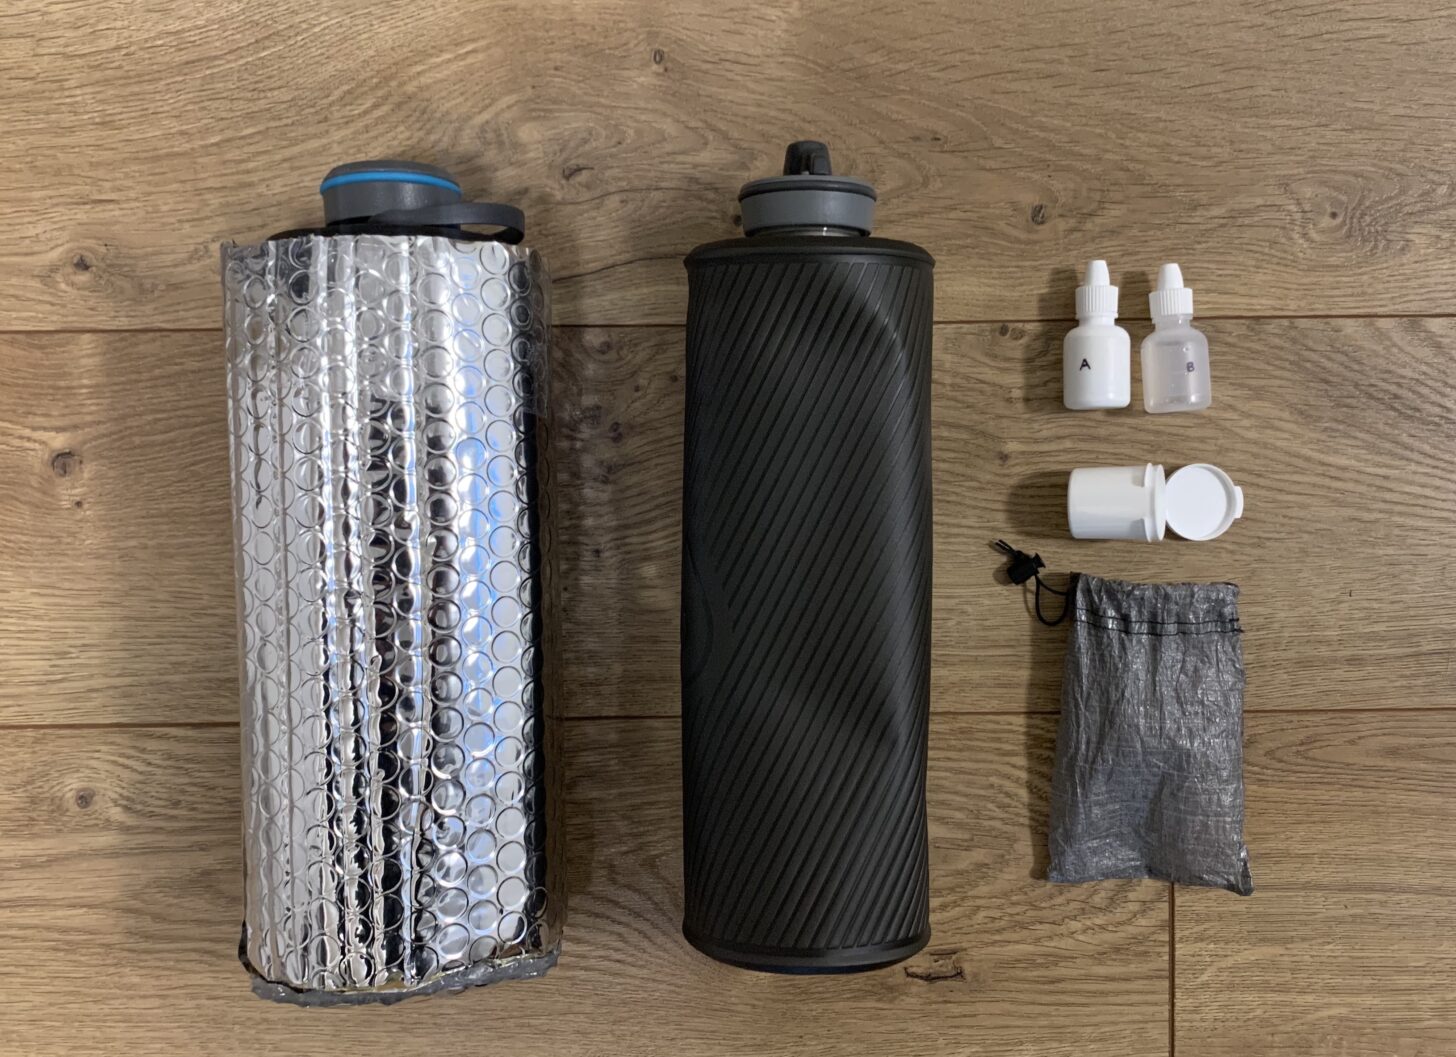 layout of hydration gear - a water bottle in a homemade reflective bubble wrap cozy, another water bottle, and a small aqua mira kit.